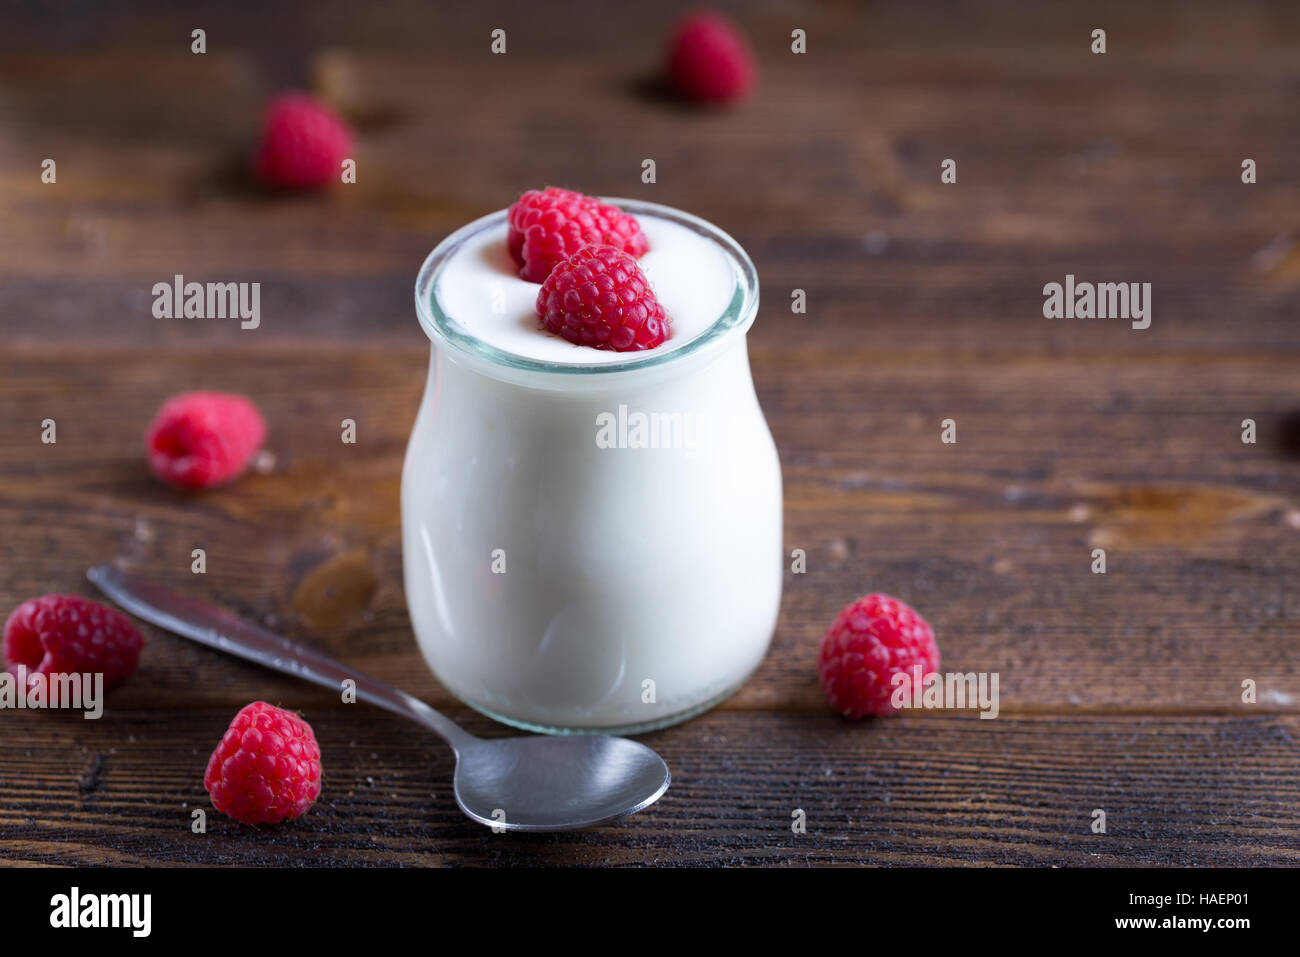 White yogurt with raspberries in glass bowl on rustic table. Stock Photo